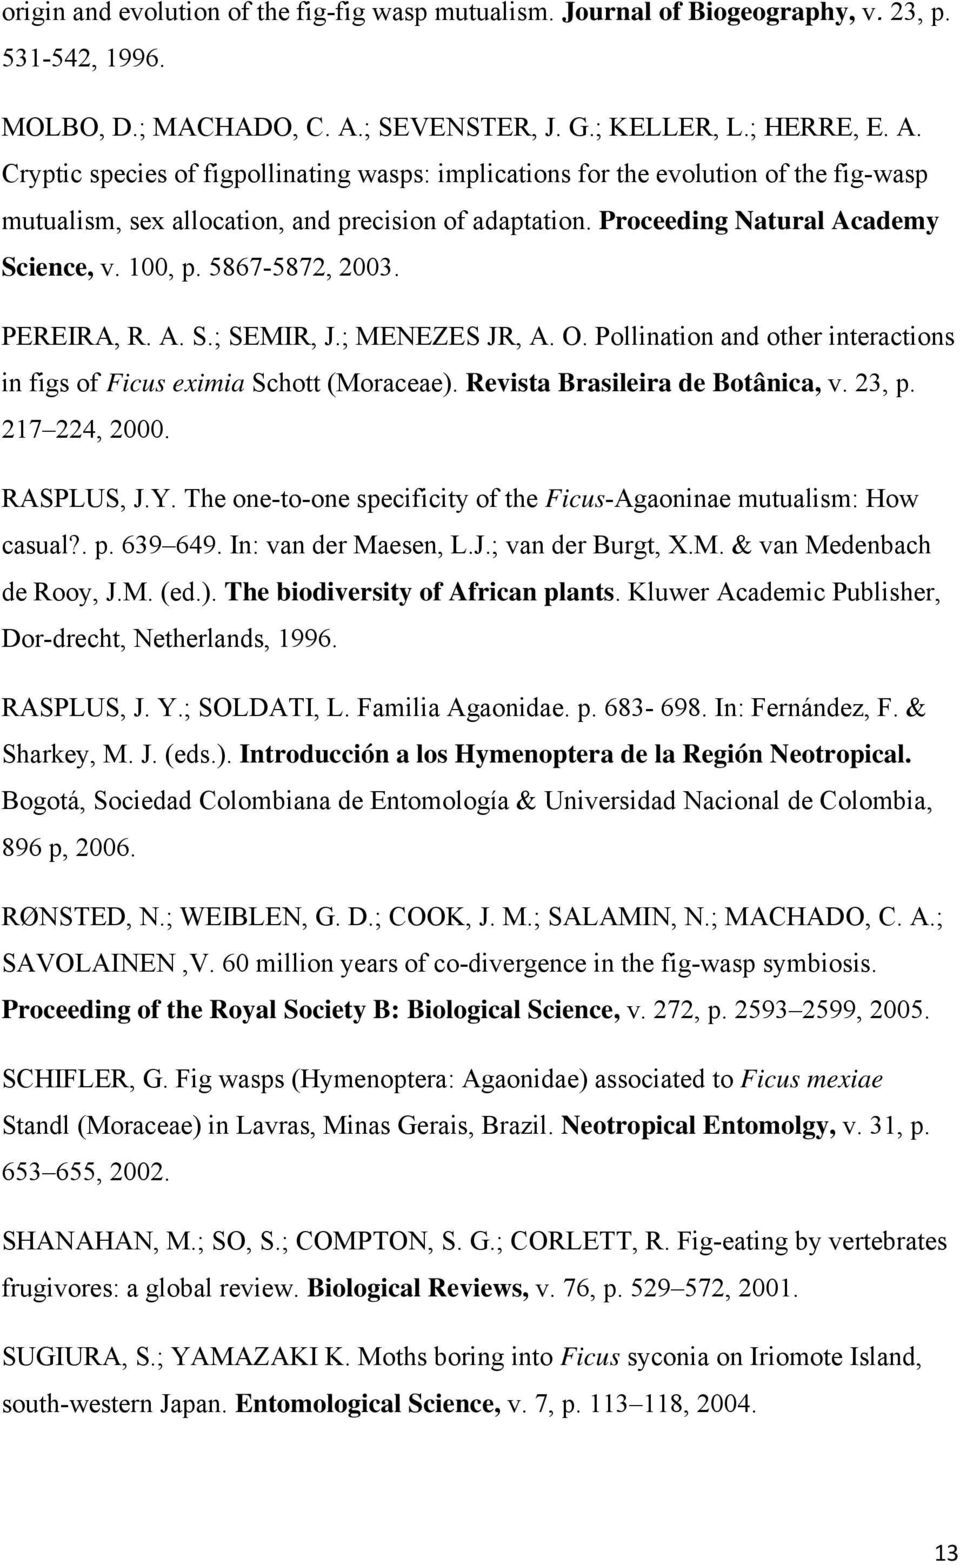 Proceeding Natural Academy Science, v. 100, p. 5867-5872, 2003. PEREIRA, R. A. S.; SEMIR, J.; MENEZES JR, A. O. Pollination and other interactions in figs of Ficus eximia Schott (Moraceae).